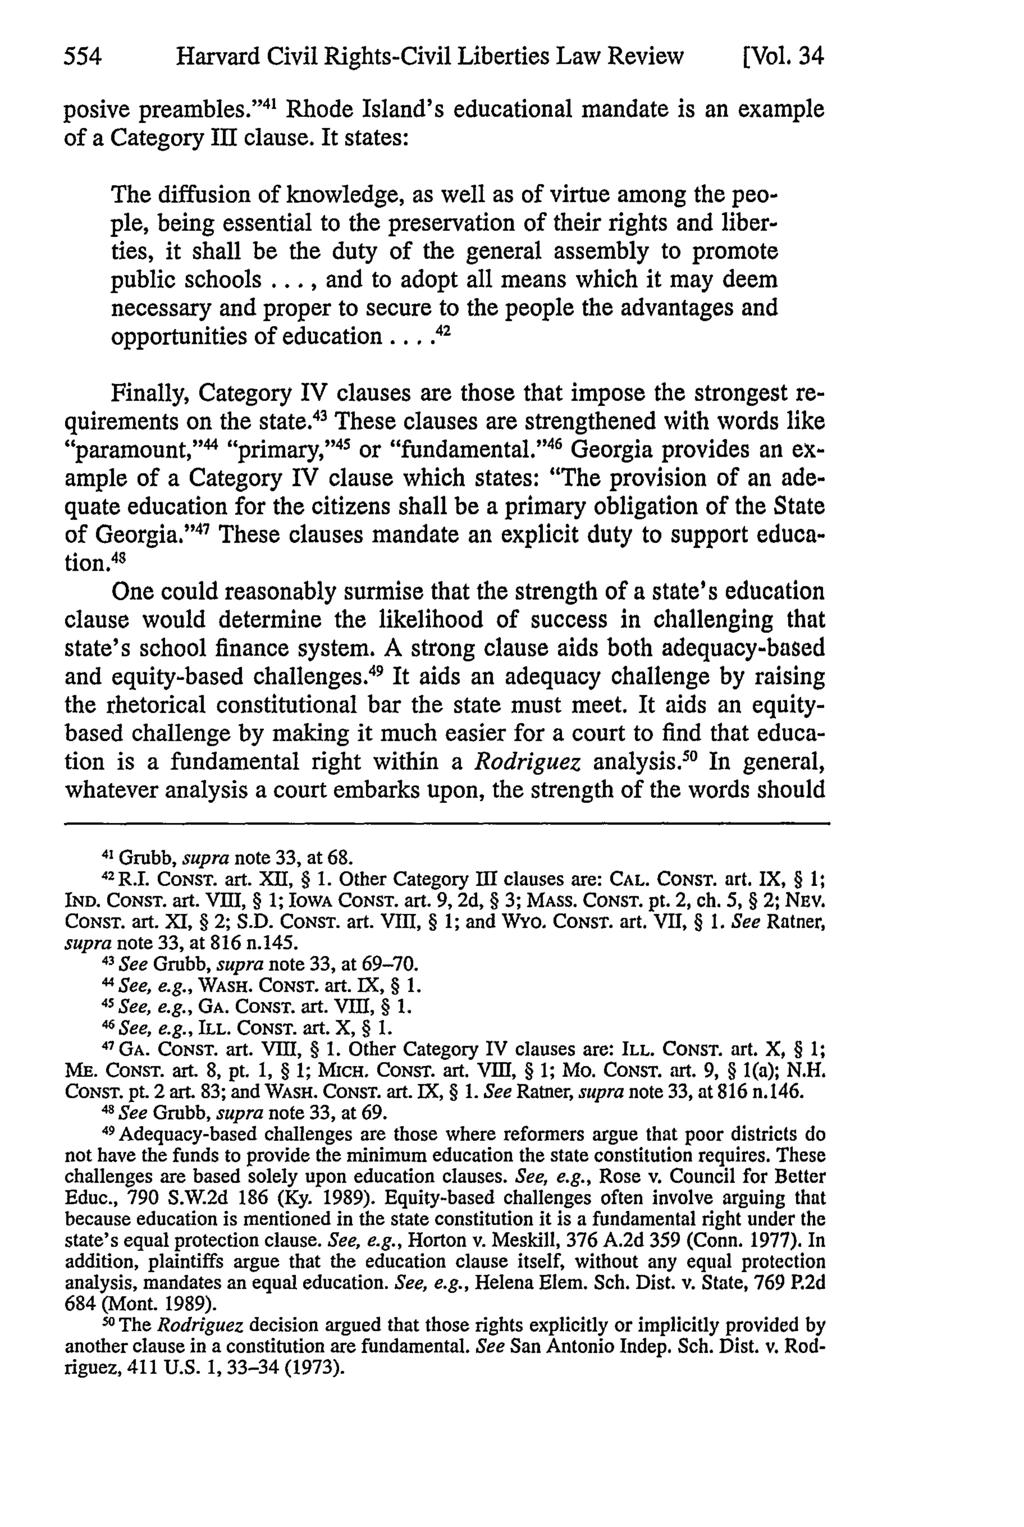 Harvard Civil Rights-Civil Liberties Law Review [Vol. 34 posive preambles." 4 Rhode Island's educational mandate is an example of a Category III clause.